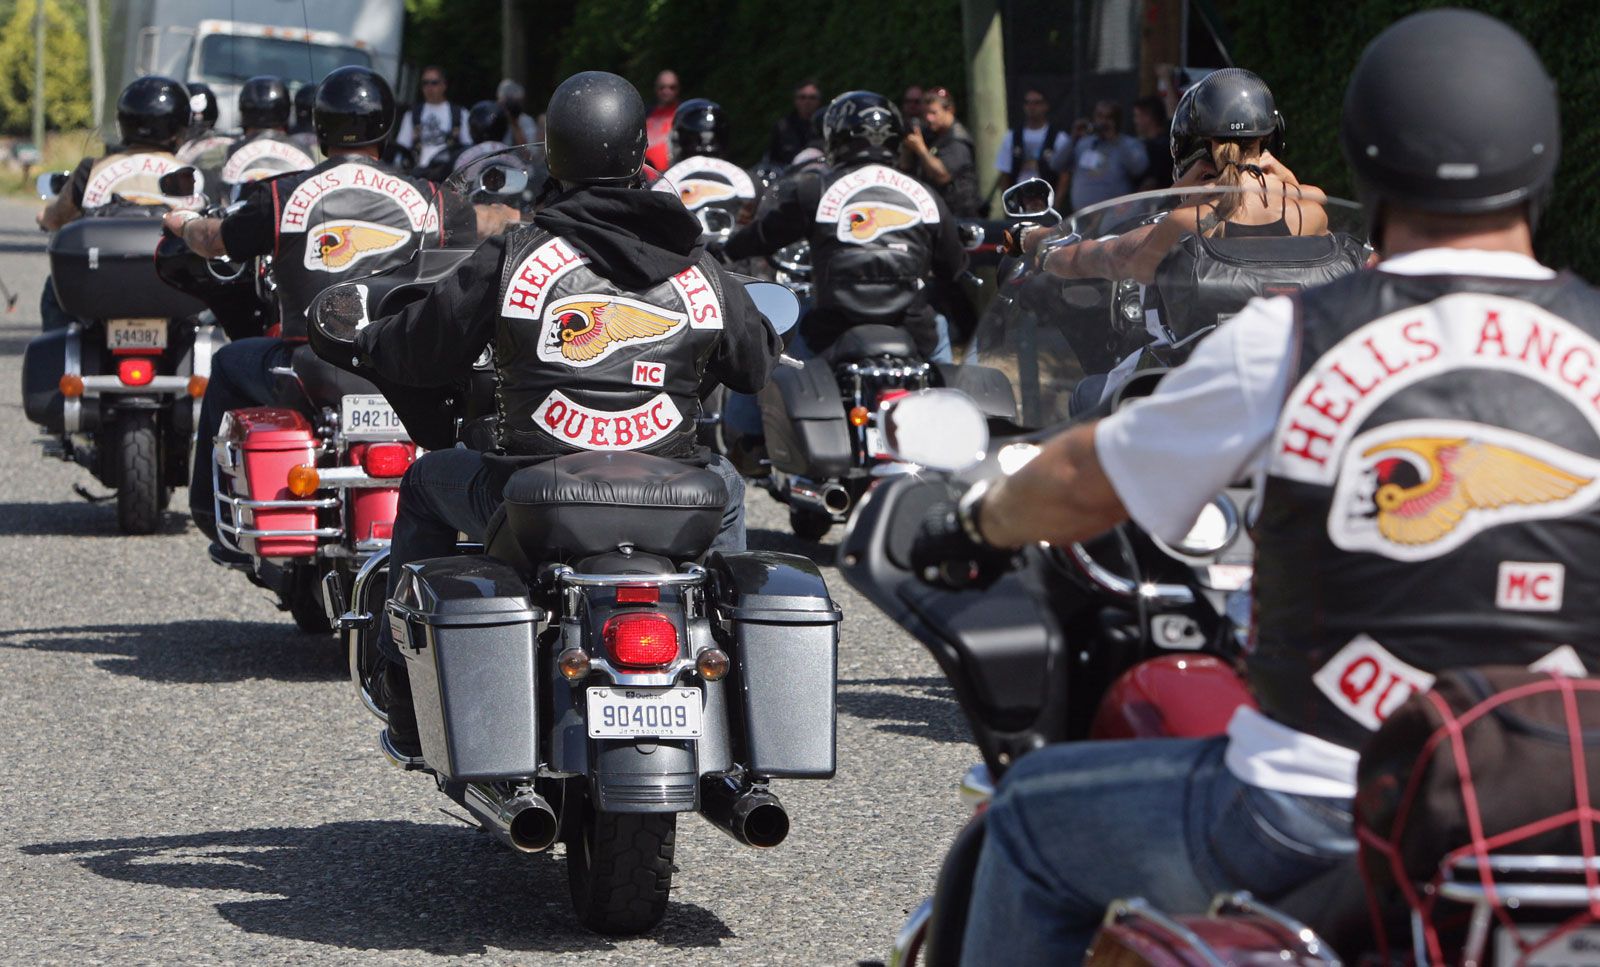 This Is Why The Hells Angels And Iron Order Are Enemies